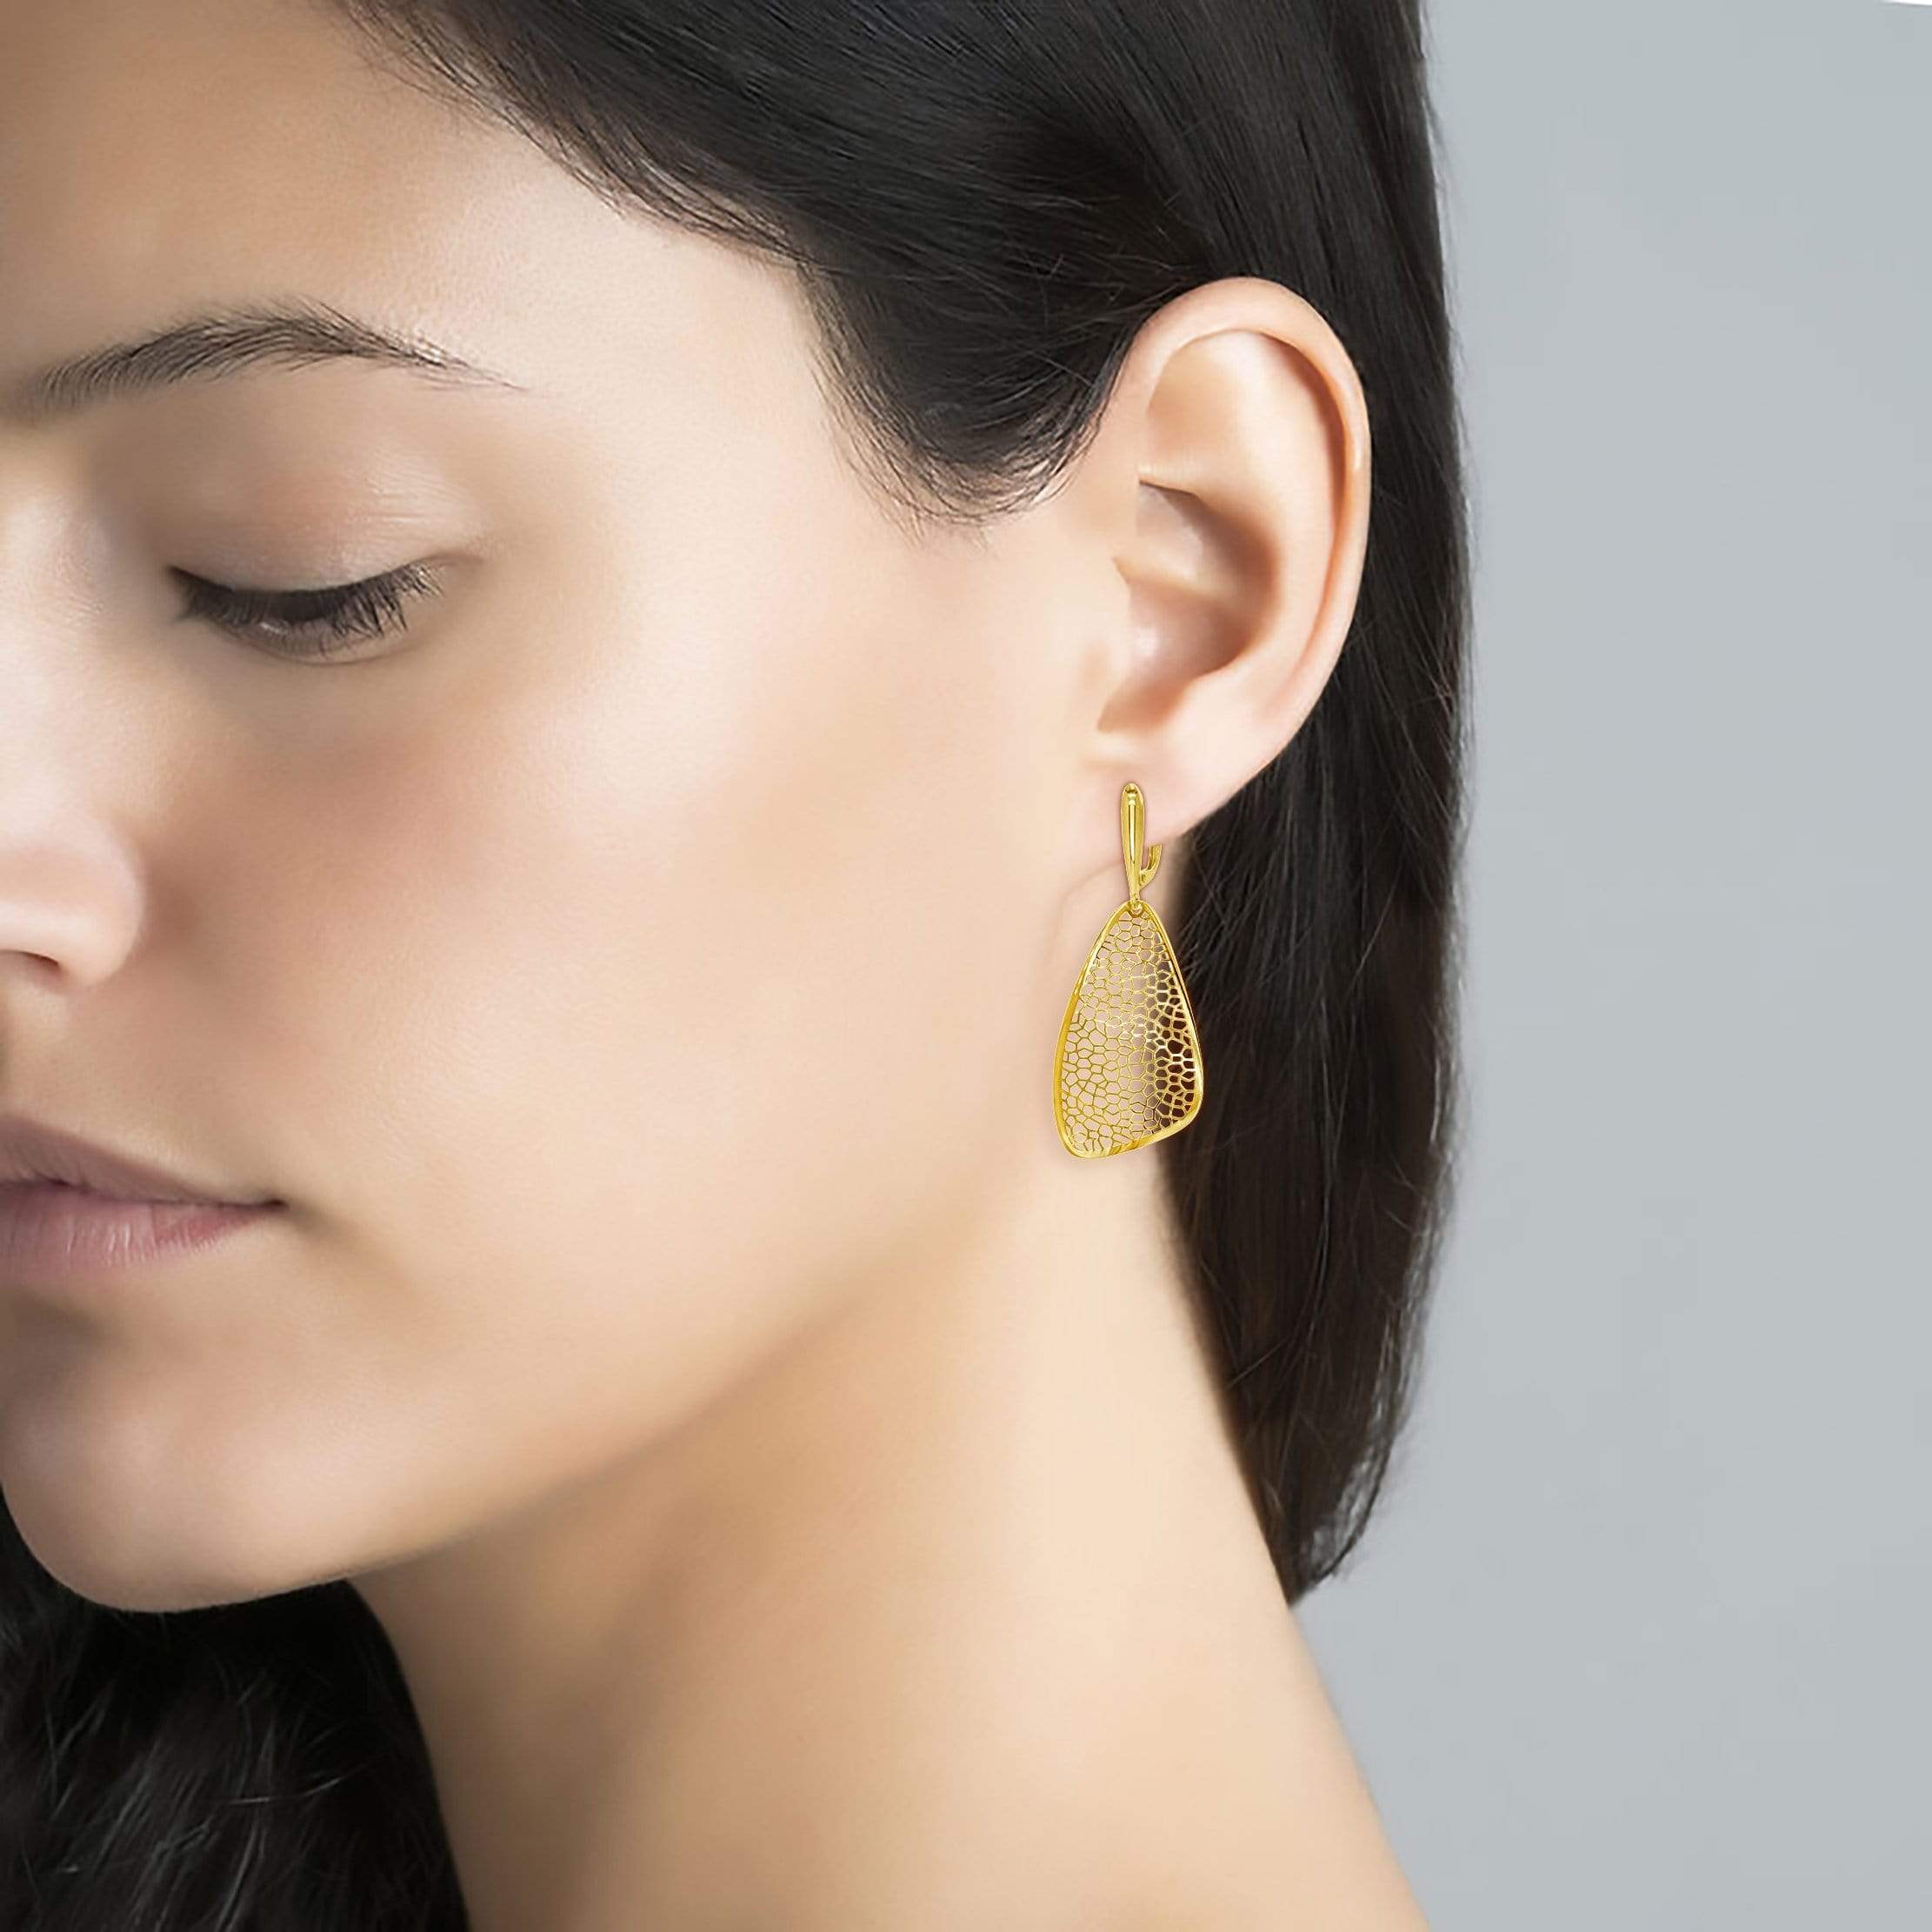 Lynora Jewellery Earring Yellow Gold Plate Tamburato Earrings Yellow Gold Plate